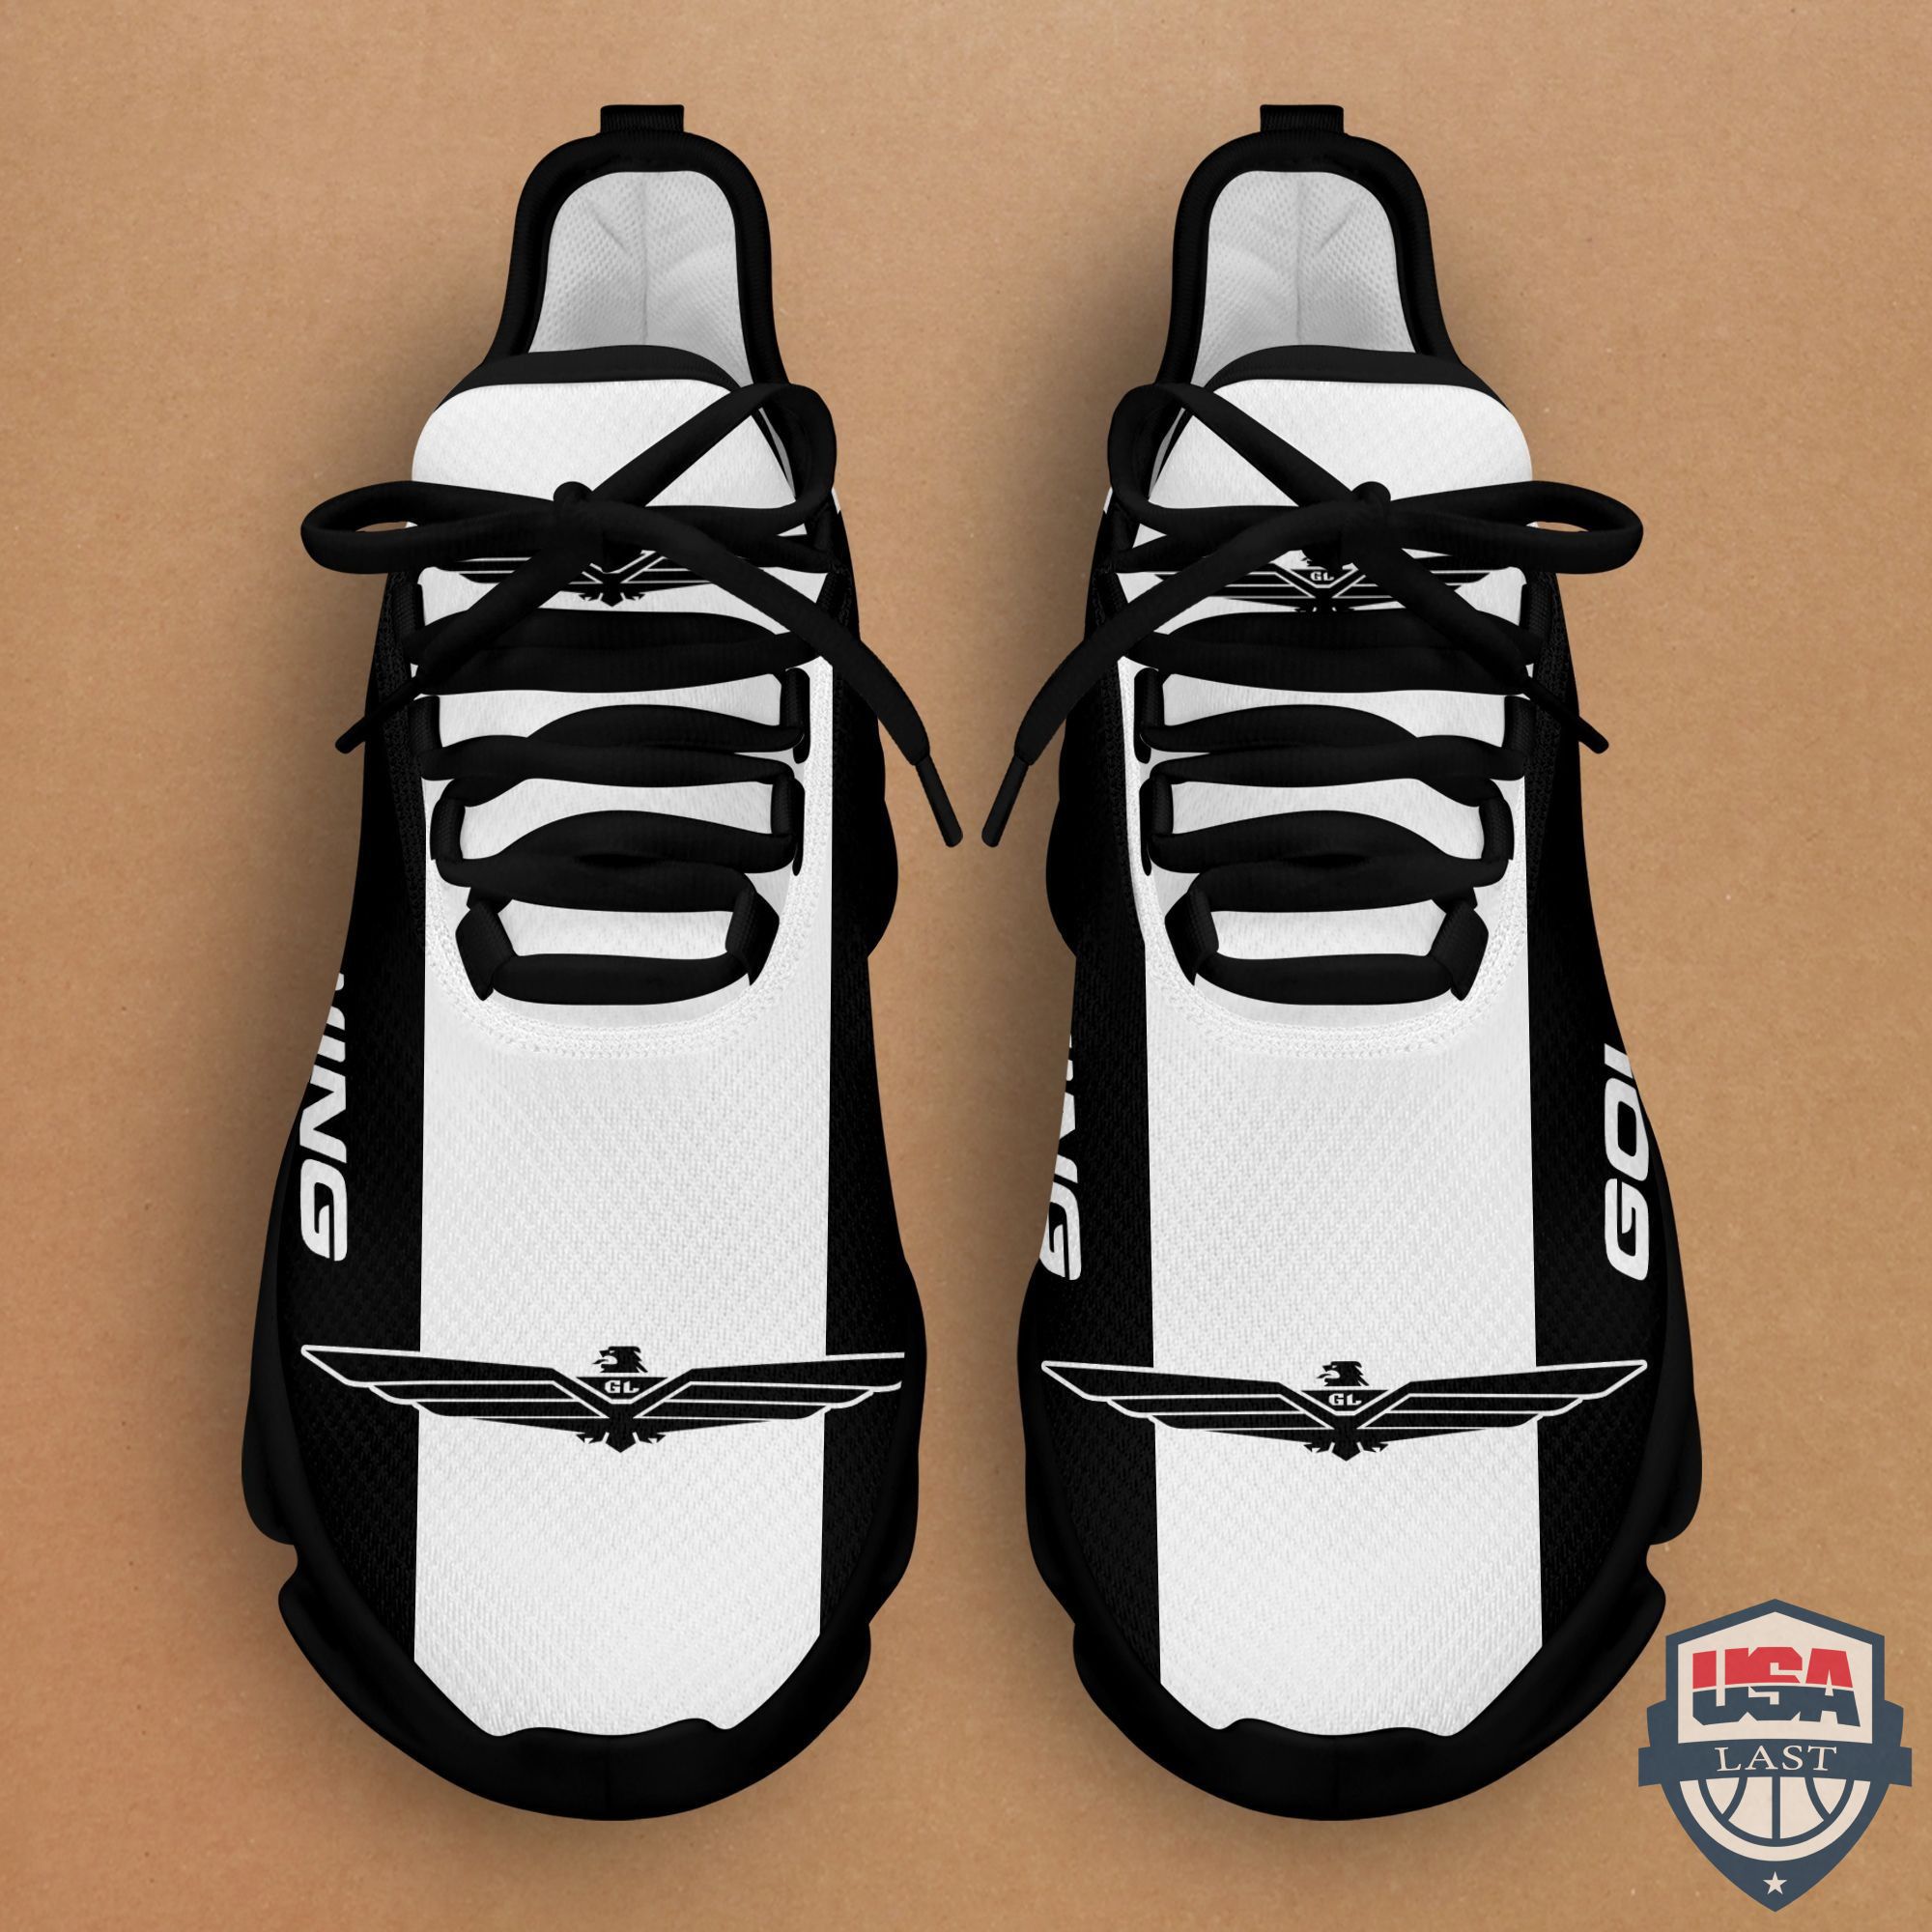 Top Trending – Honda Gold Wing Max Soul Shoes White Version